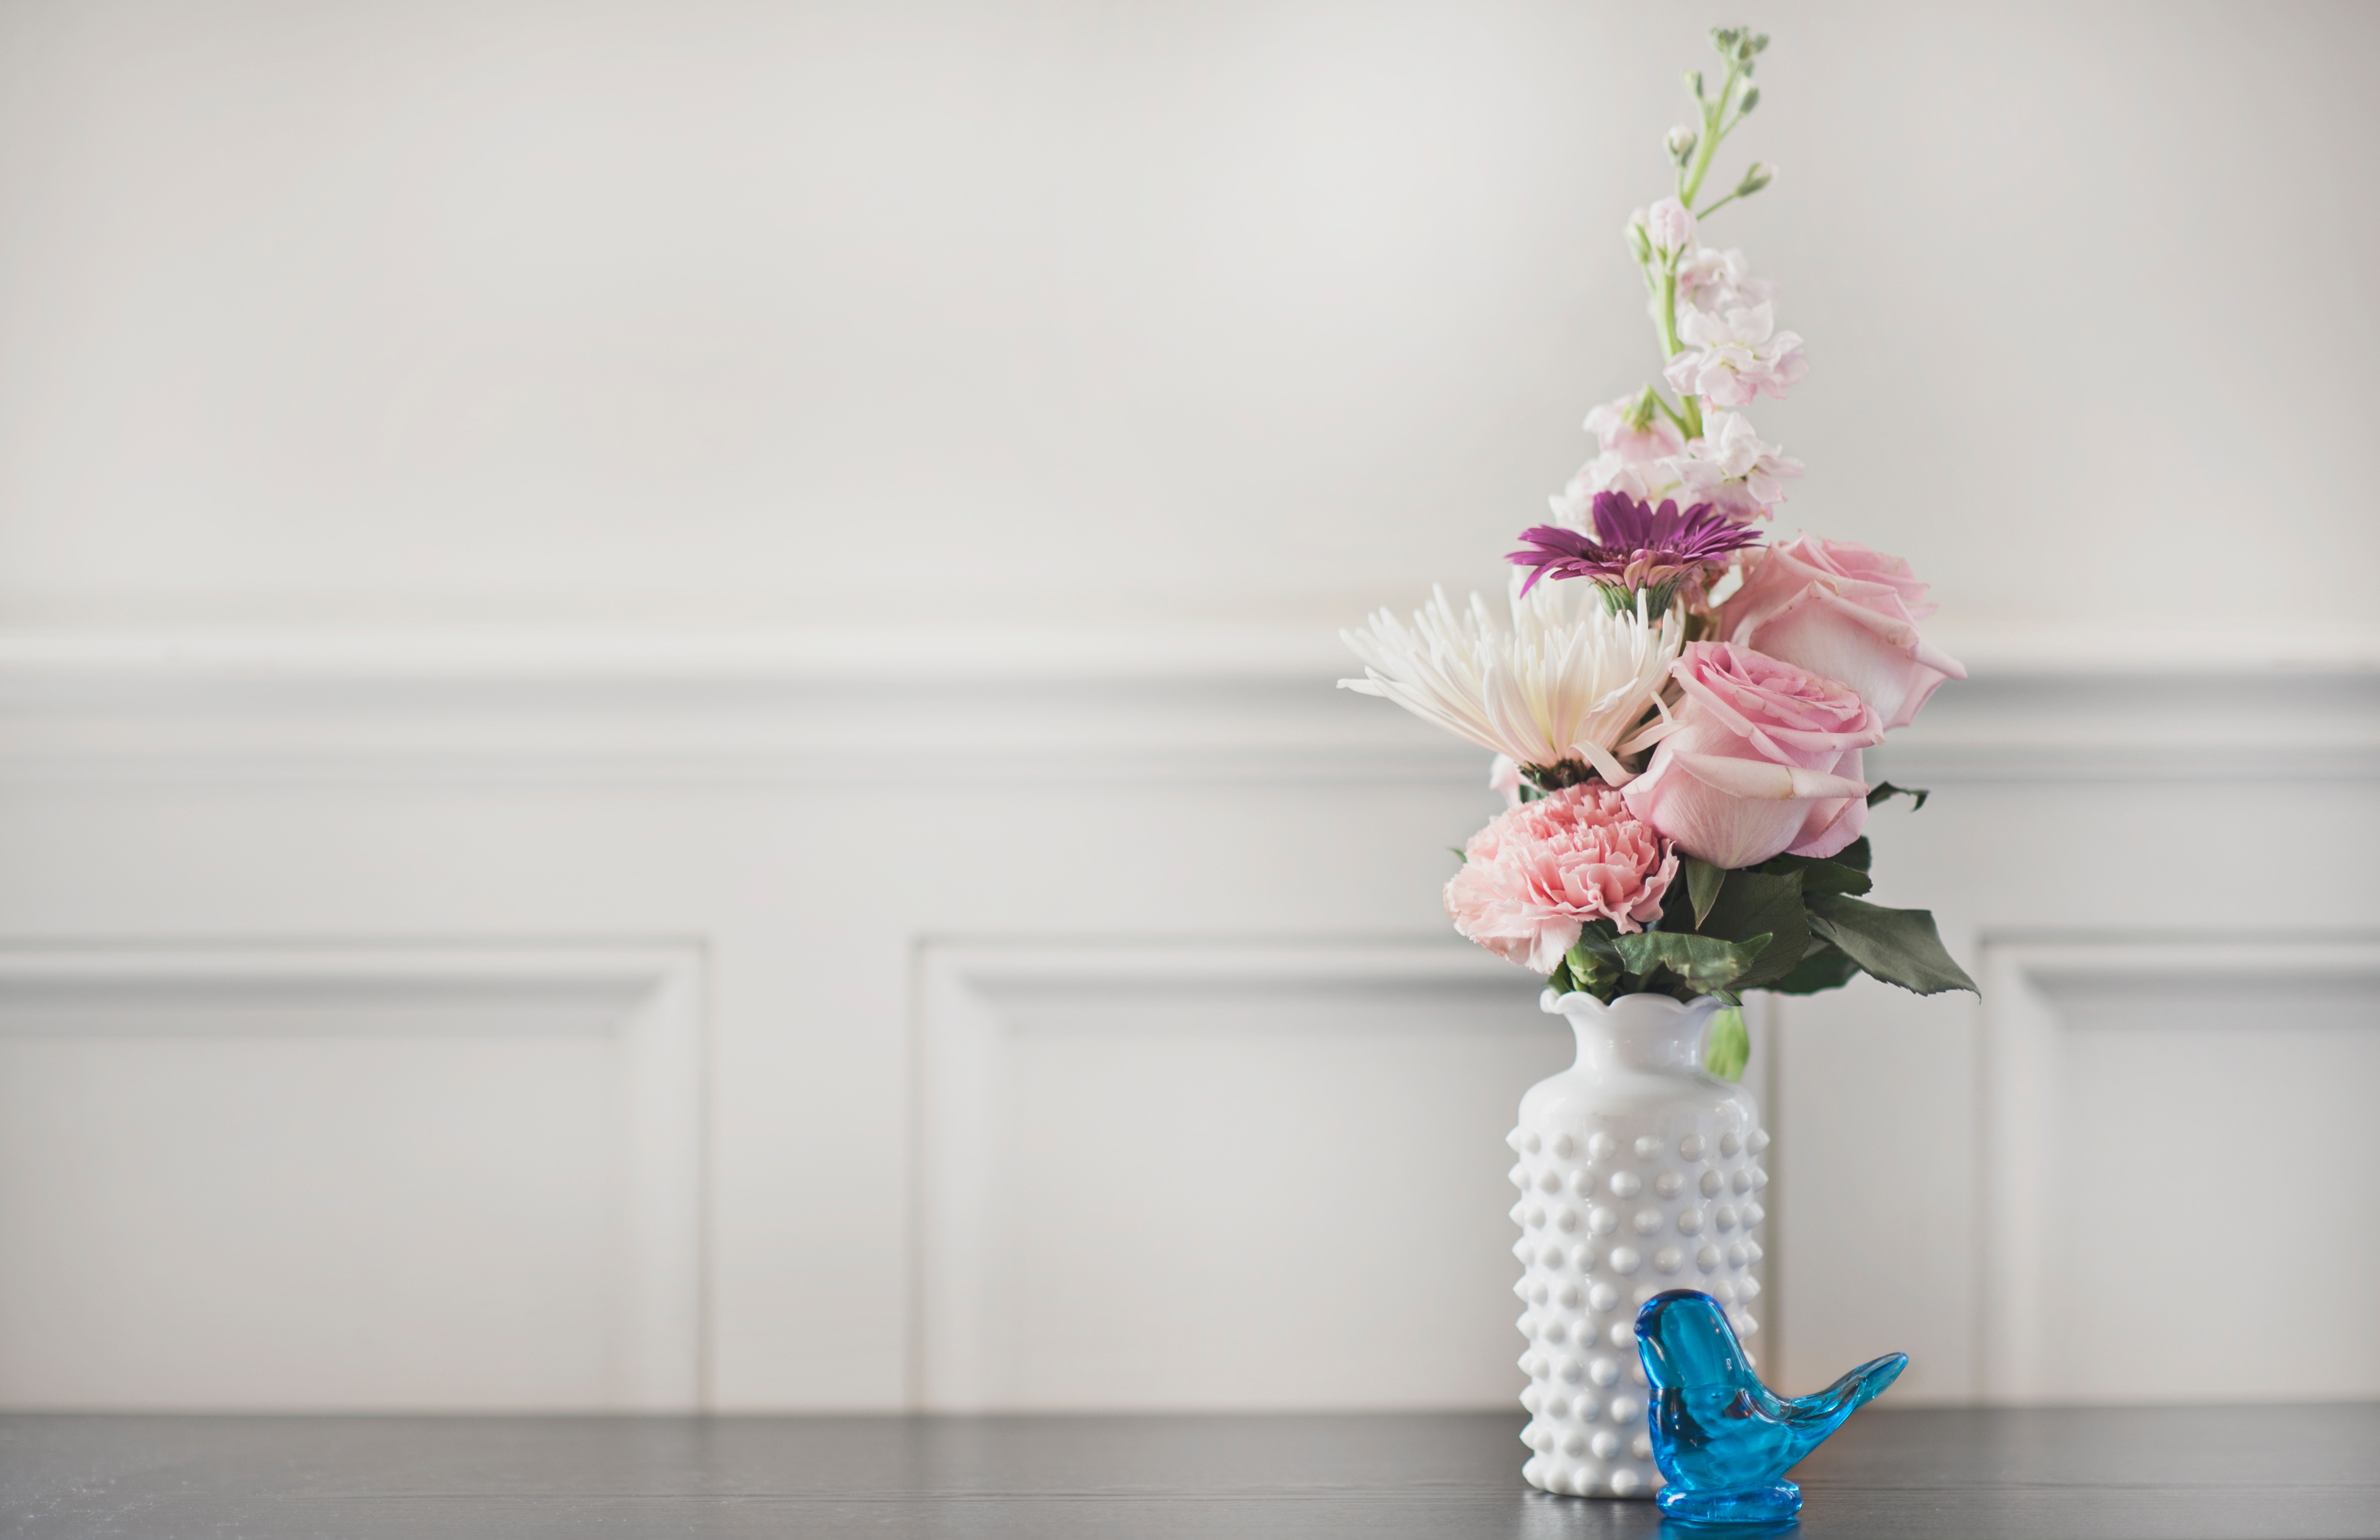 Bouquet of flowers in vase on table with blue bird